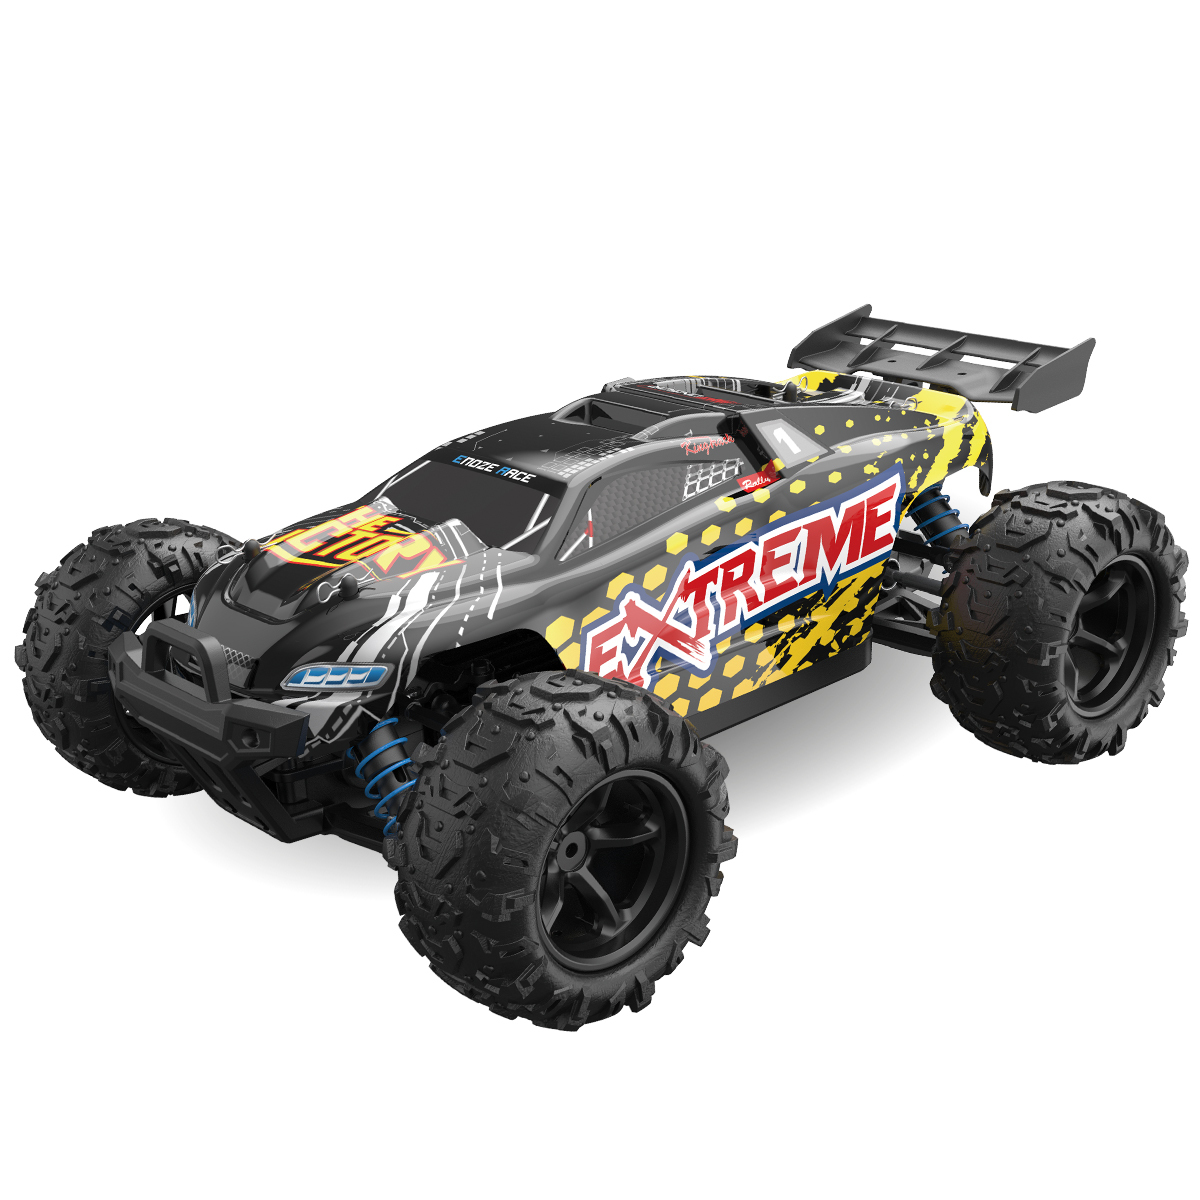 Gear2play RC Extreme Racer 1:18